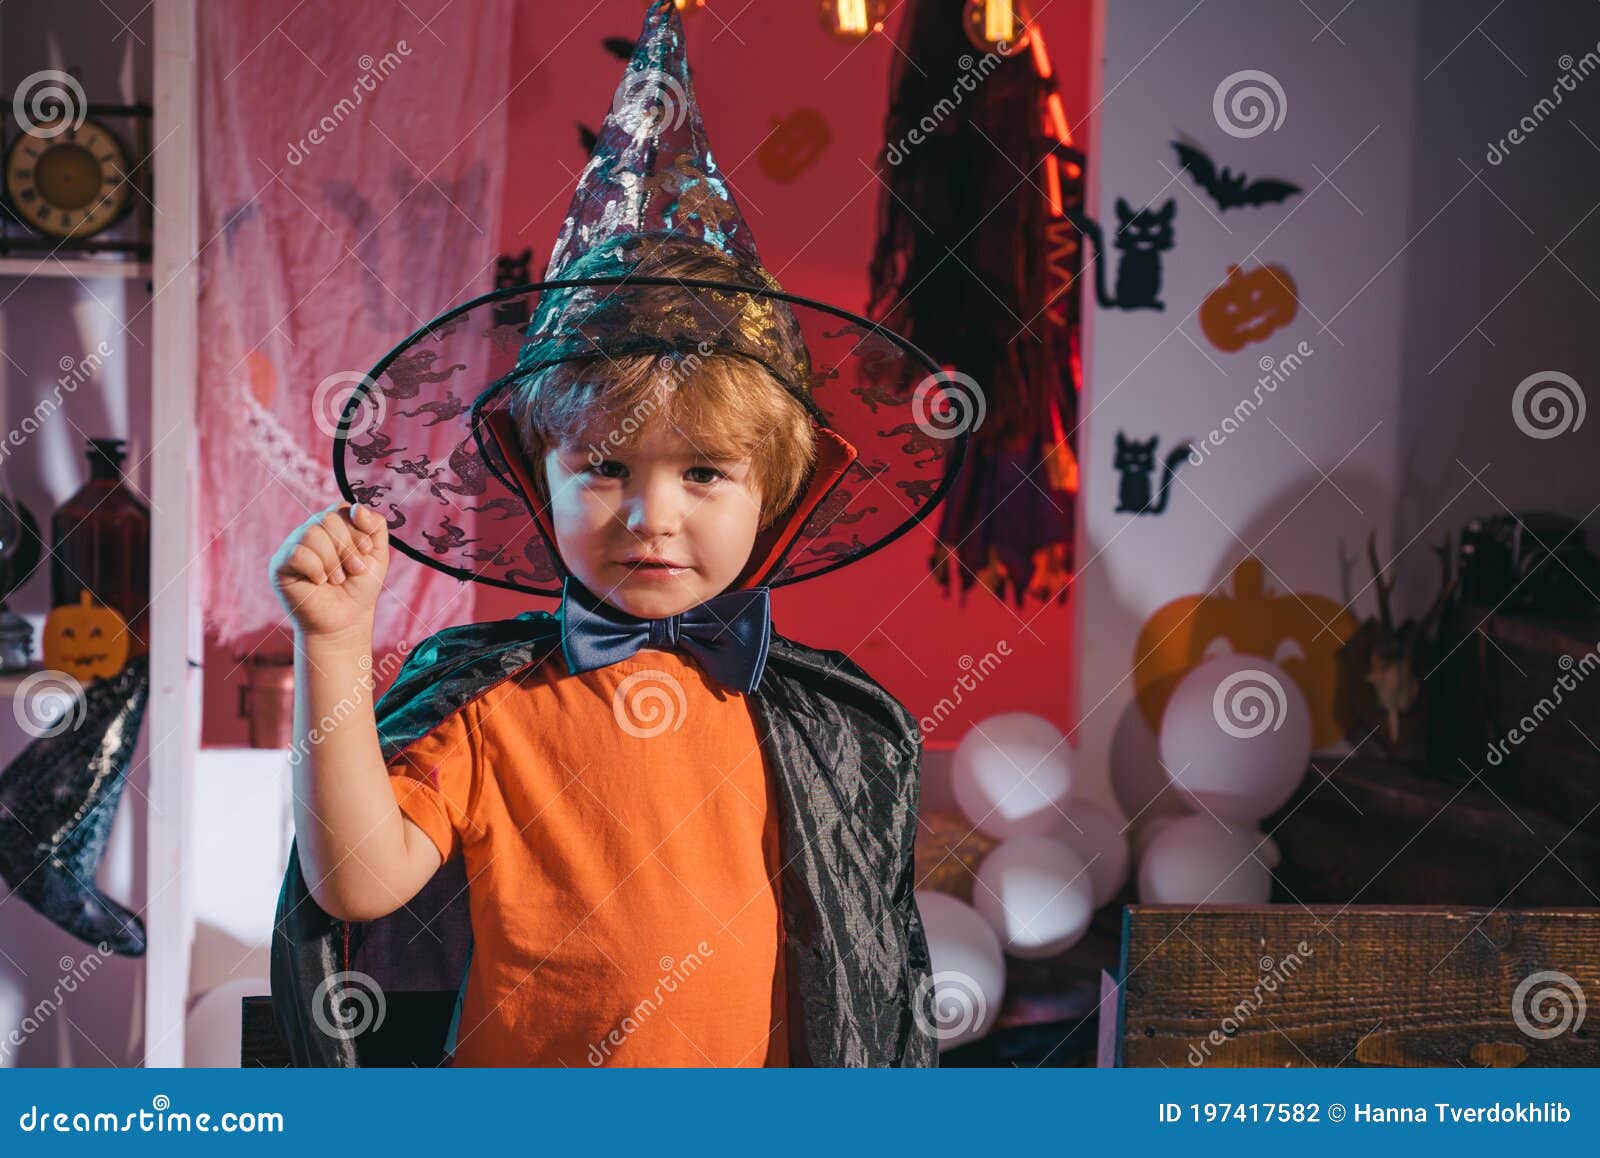 A Child in a Halloween Costume. Holidays and Happy Children. Portrait ...